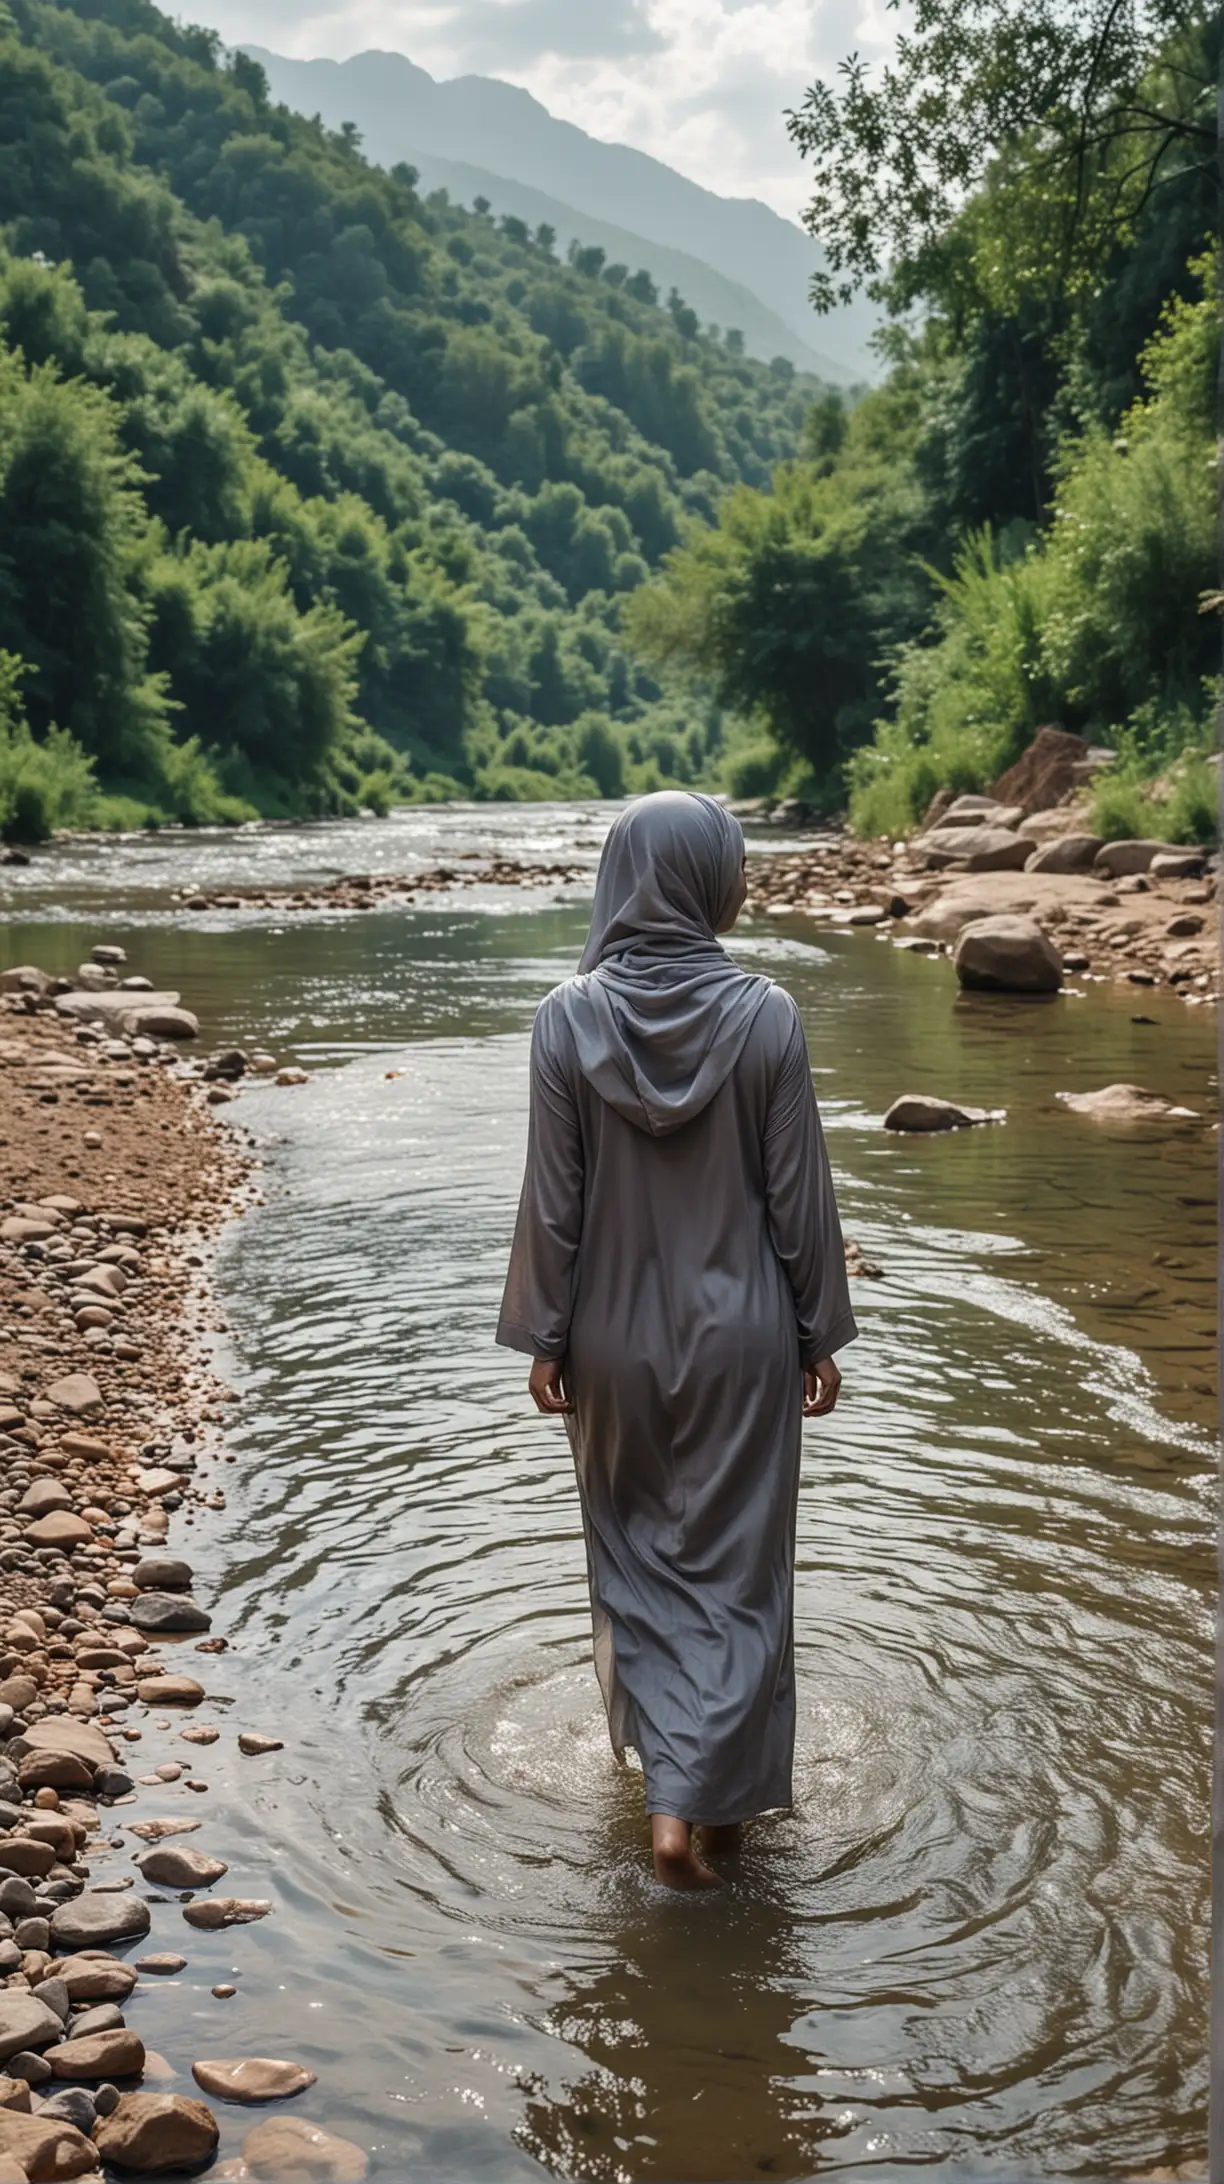 Enchanting Woman in Hijab Bathing by Clear River in Village Setting